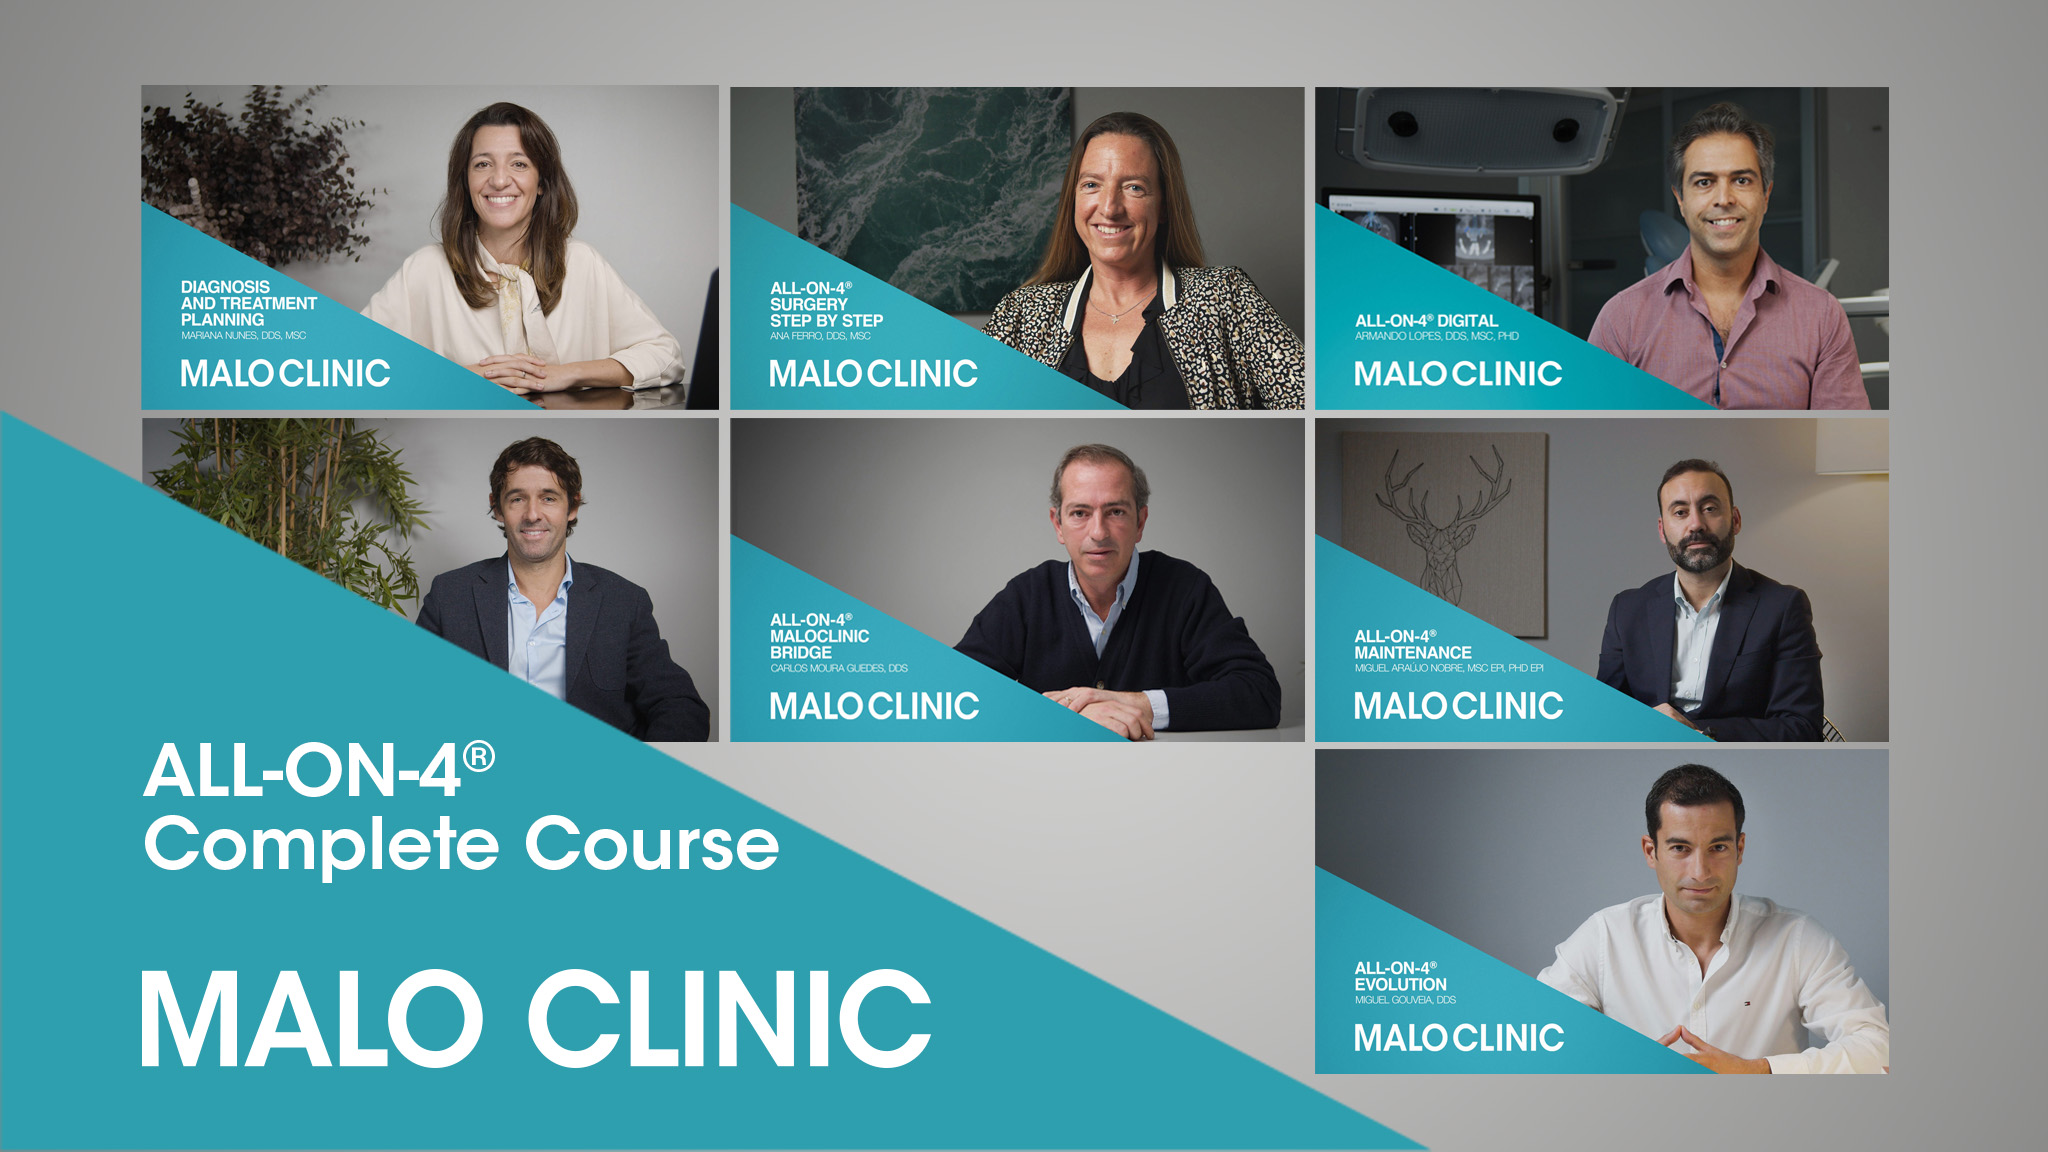 MALO CLINIC Education Online Courses